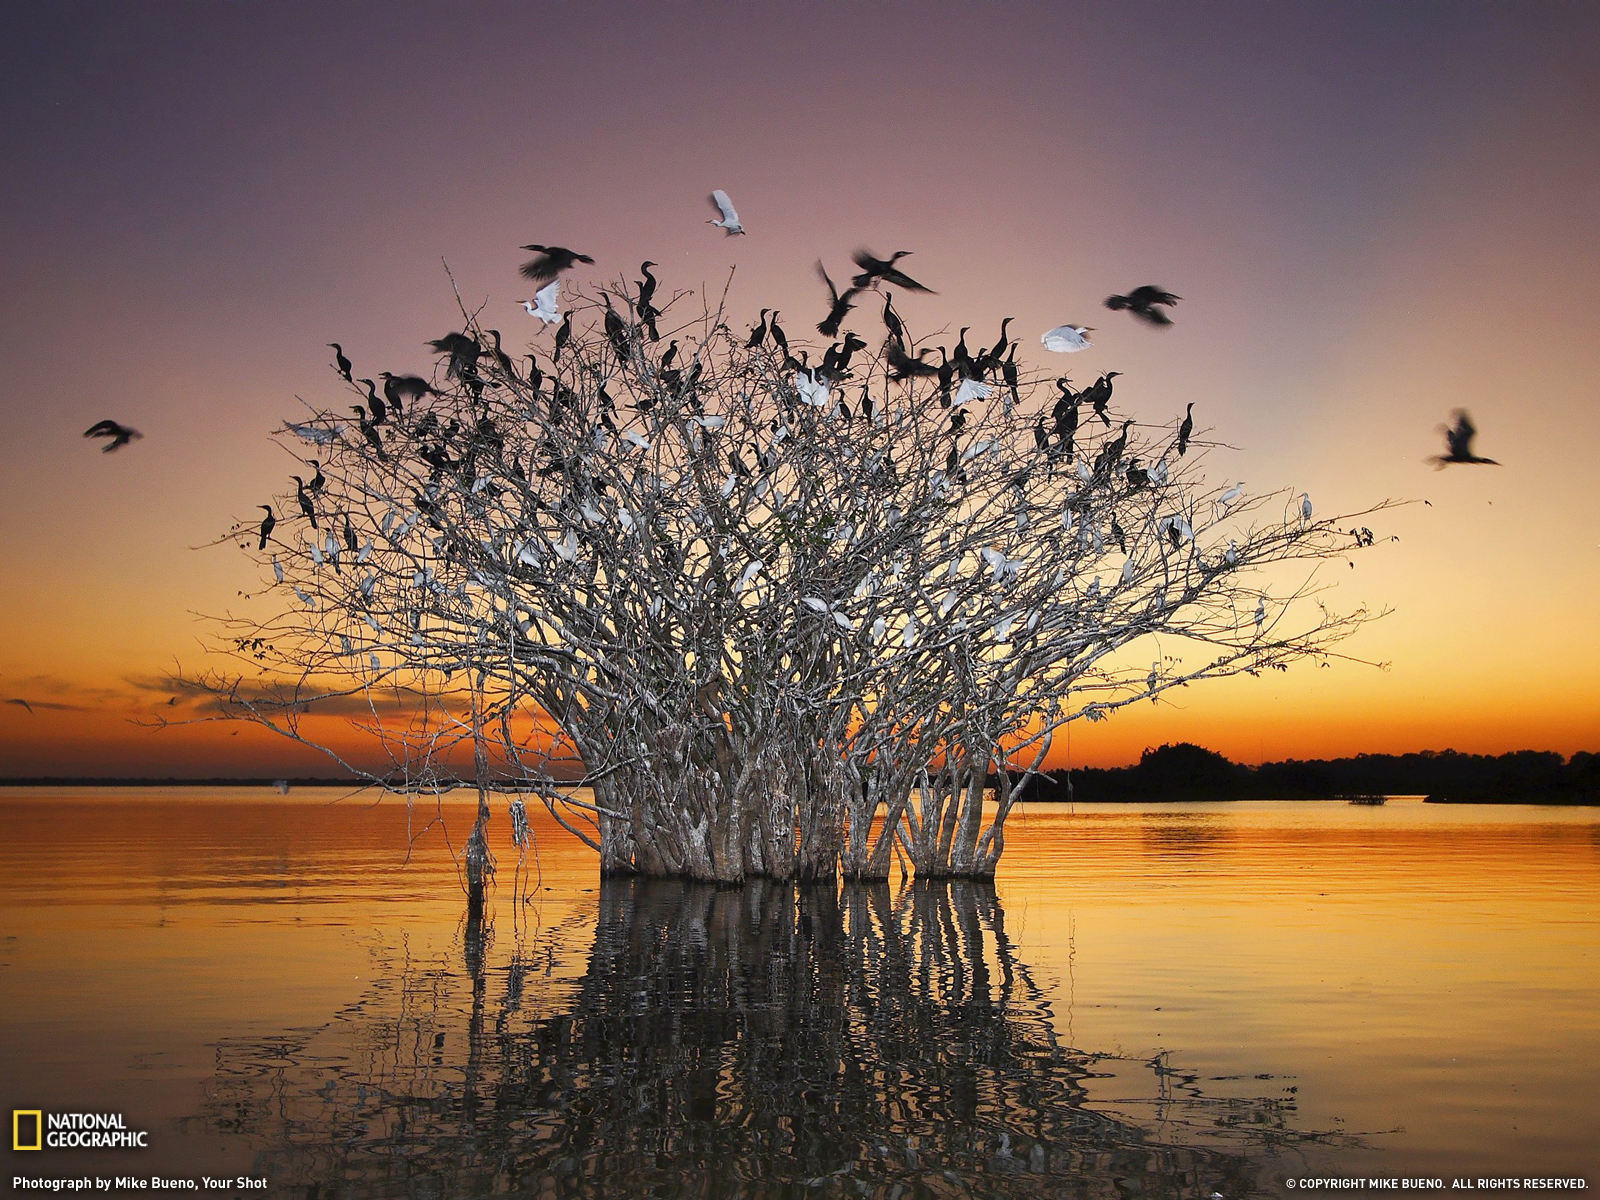 Birds Photo Brazil Wallpaper National Geographic Of The Day